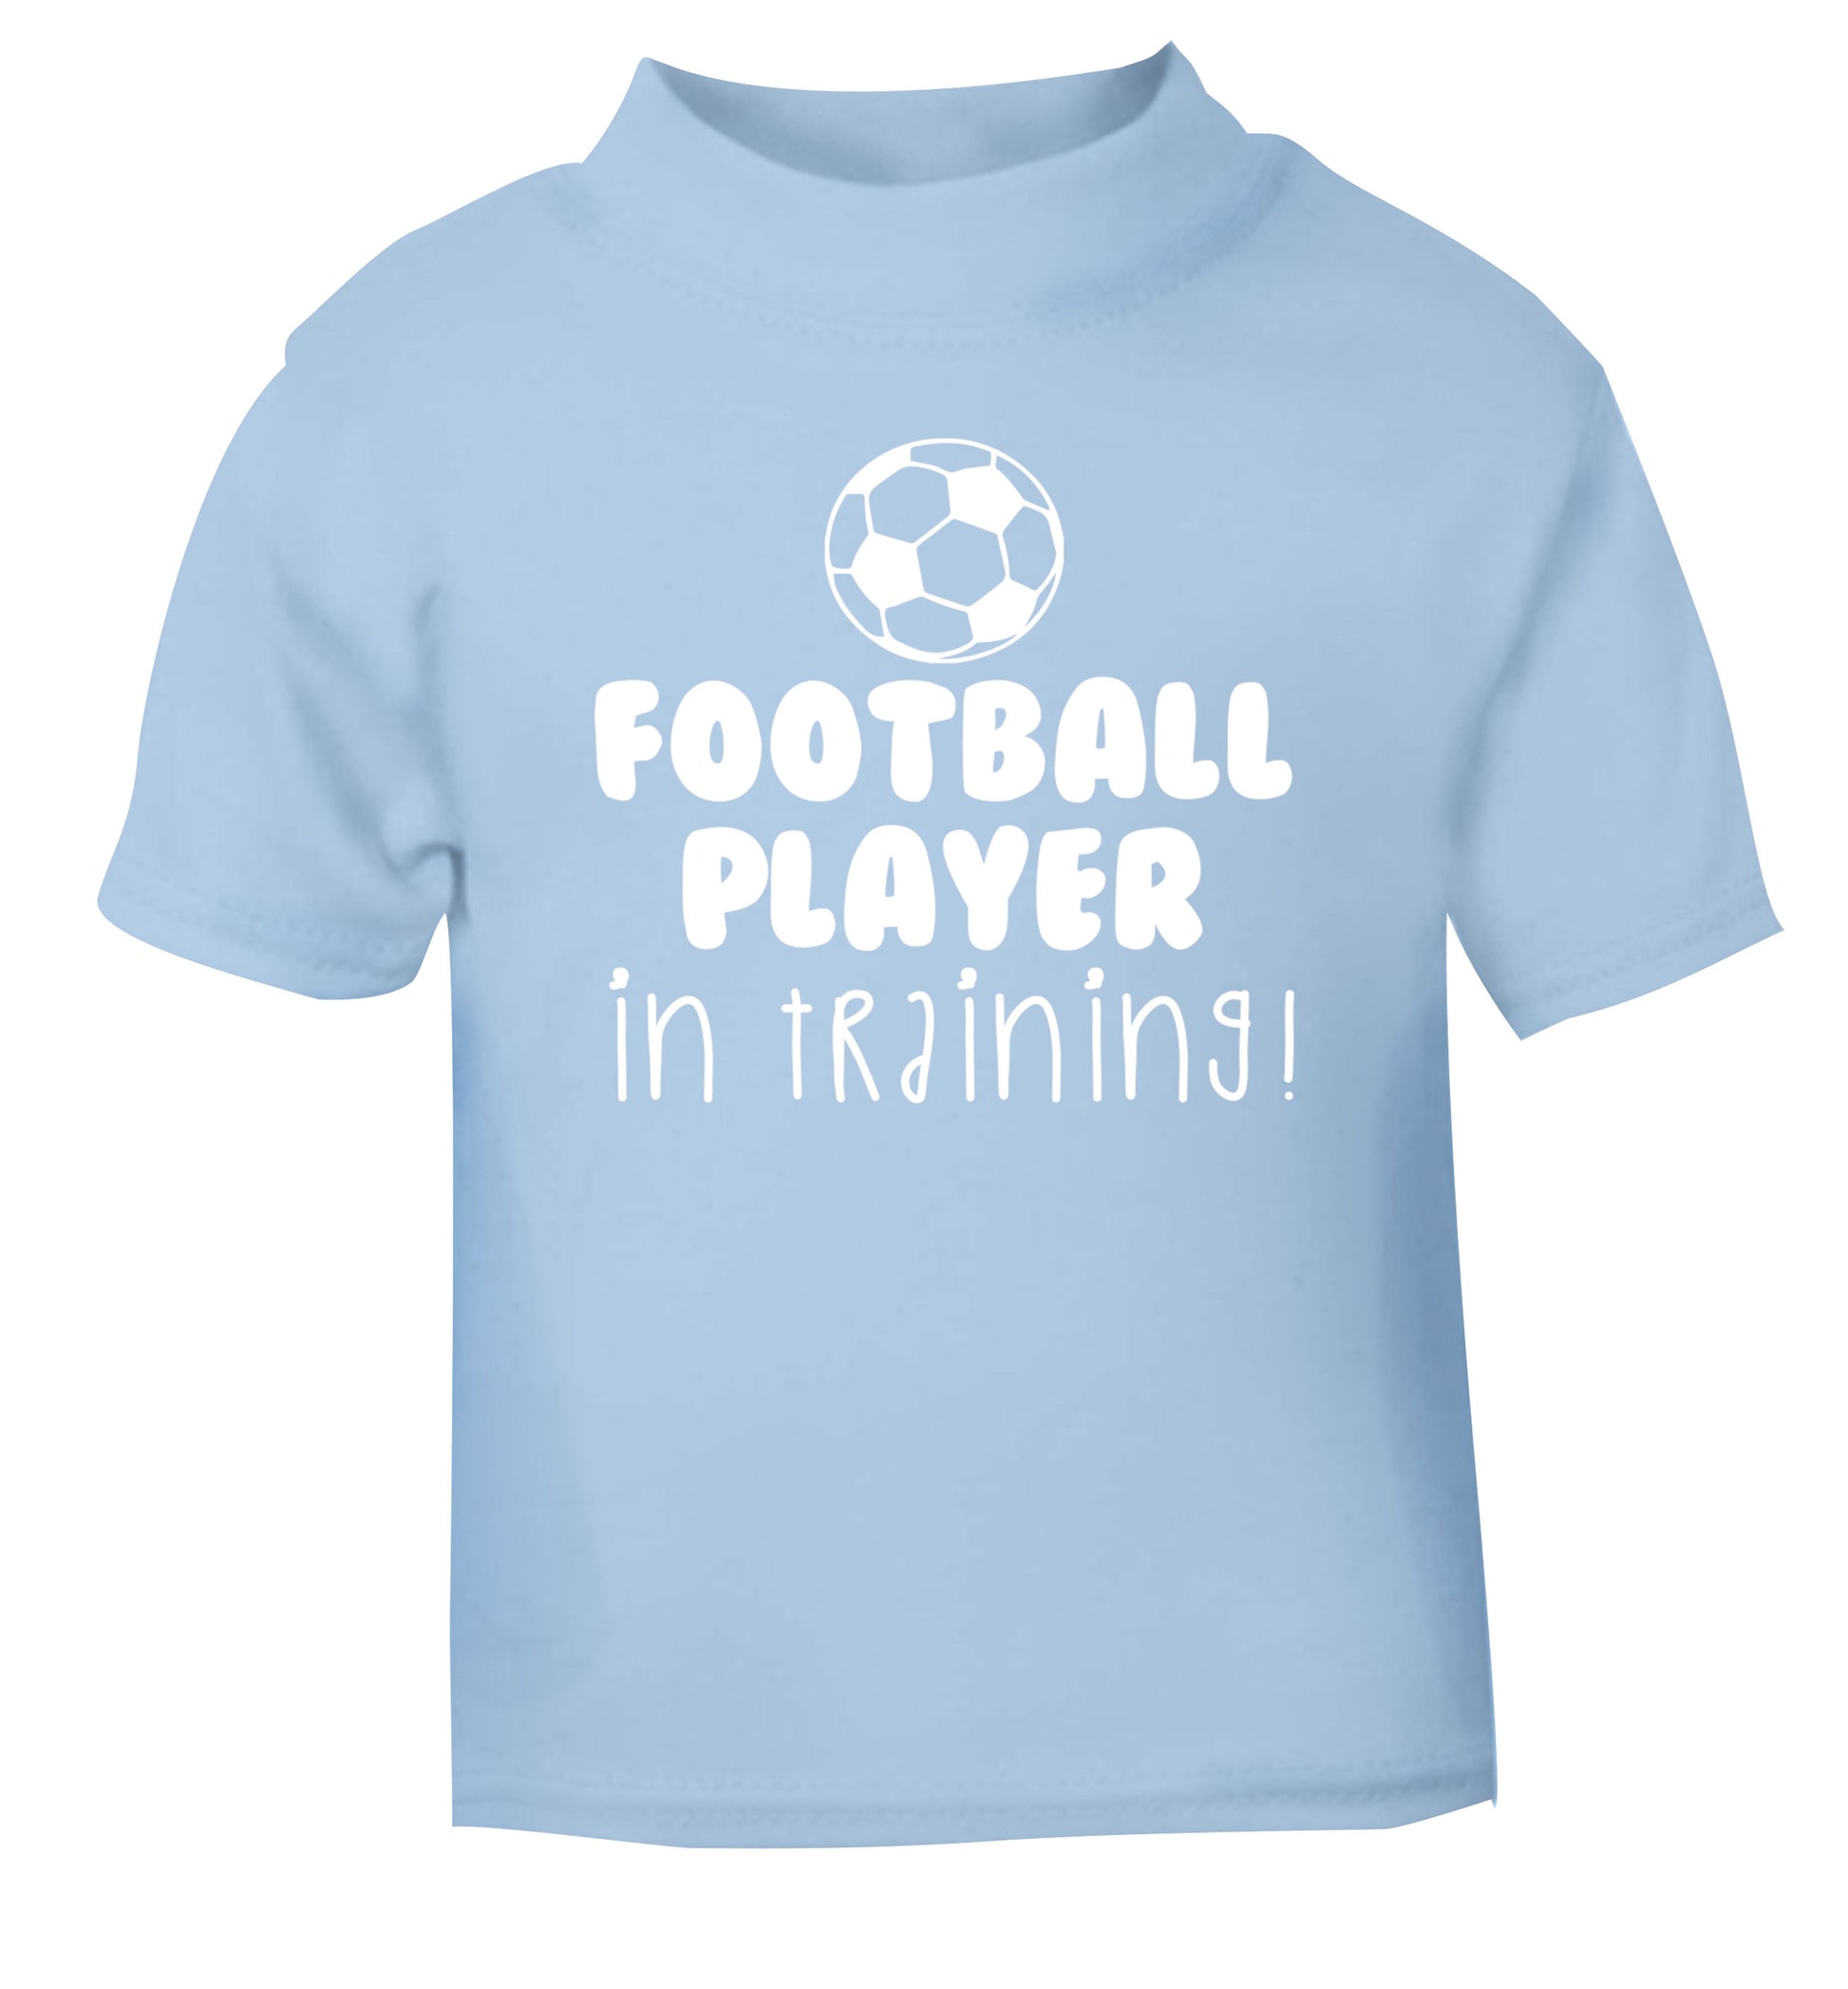 Football player in training light blue Baby Toddler Tshirt 2 Years